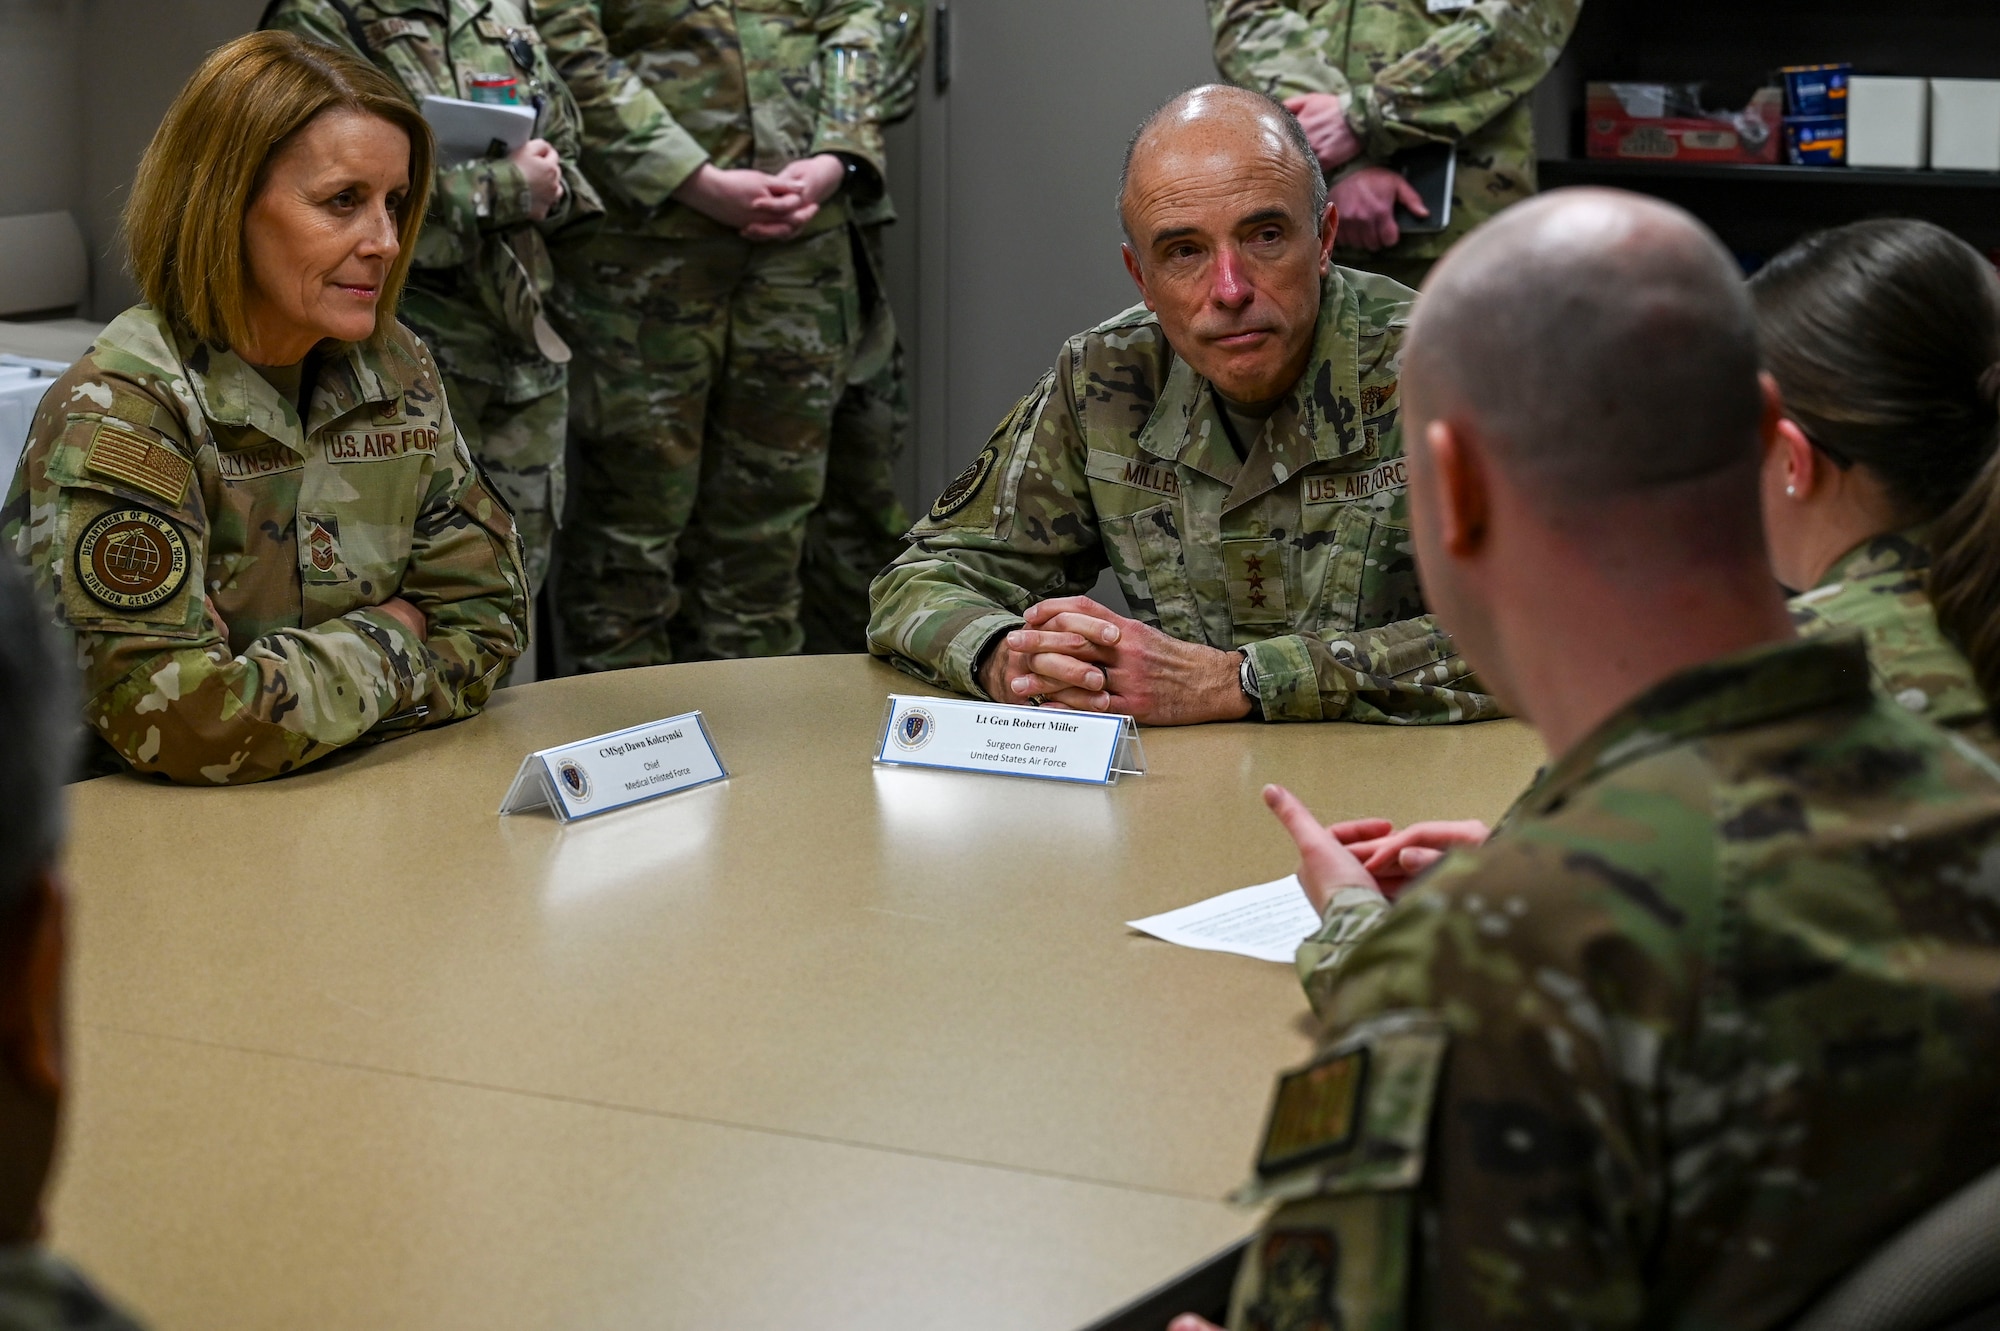 Air Force personnel talk at a table.